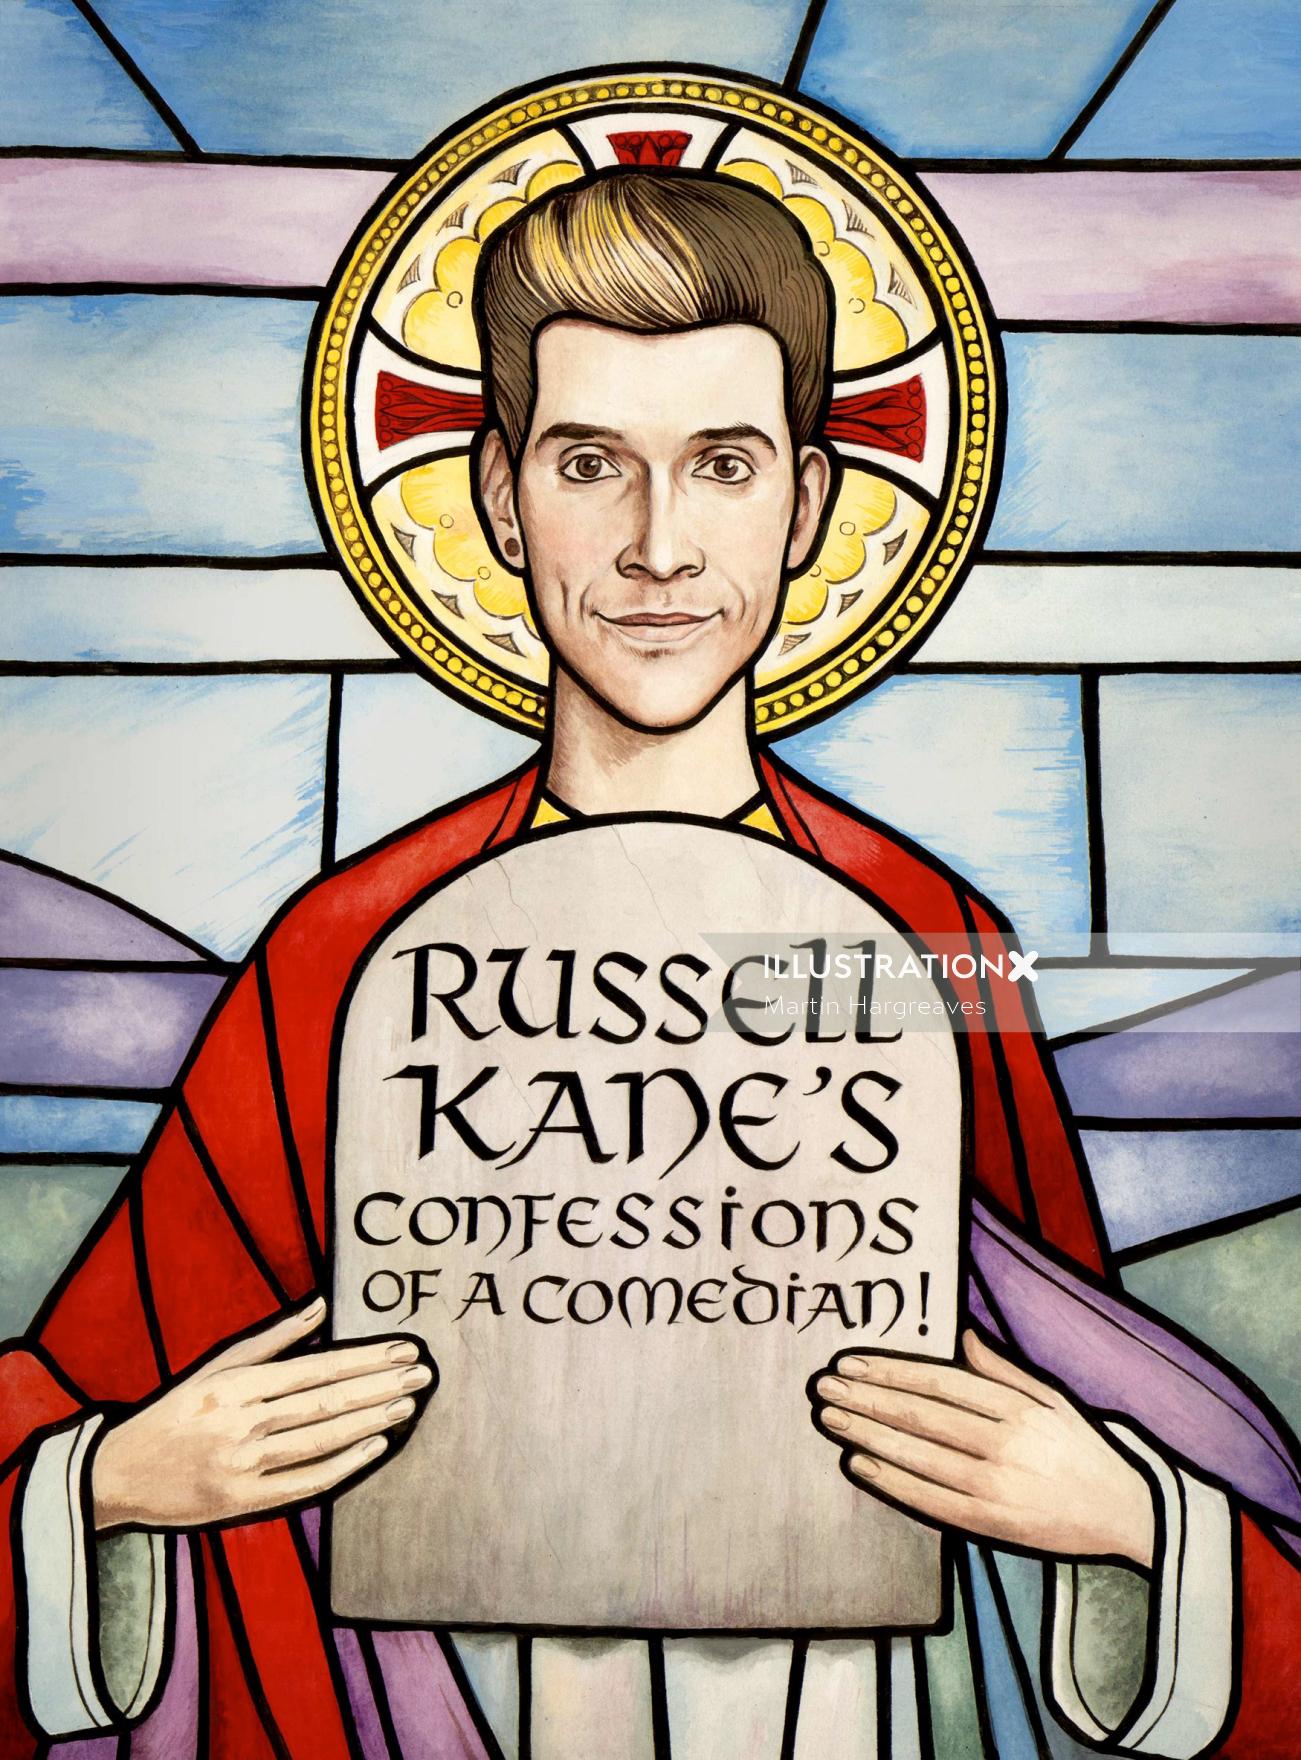 People russel kanes confession of a comedian